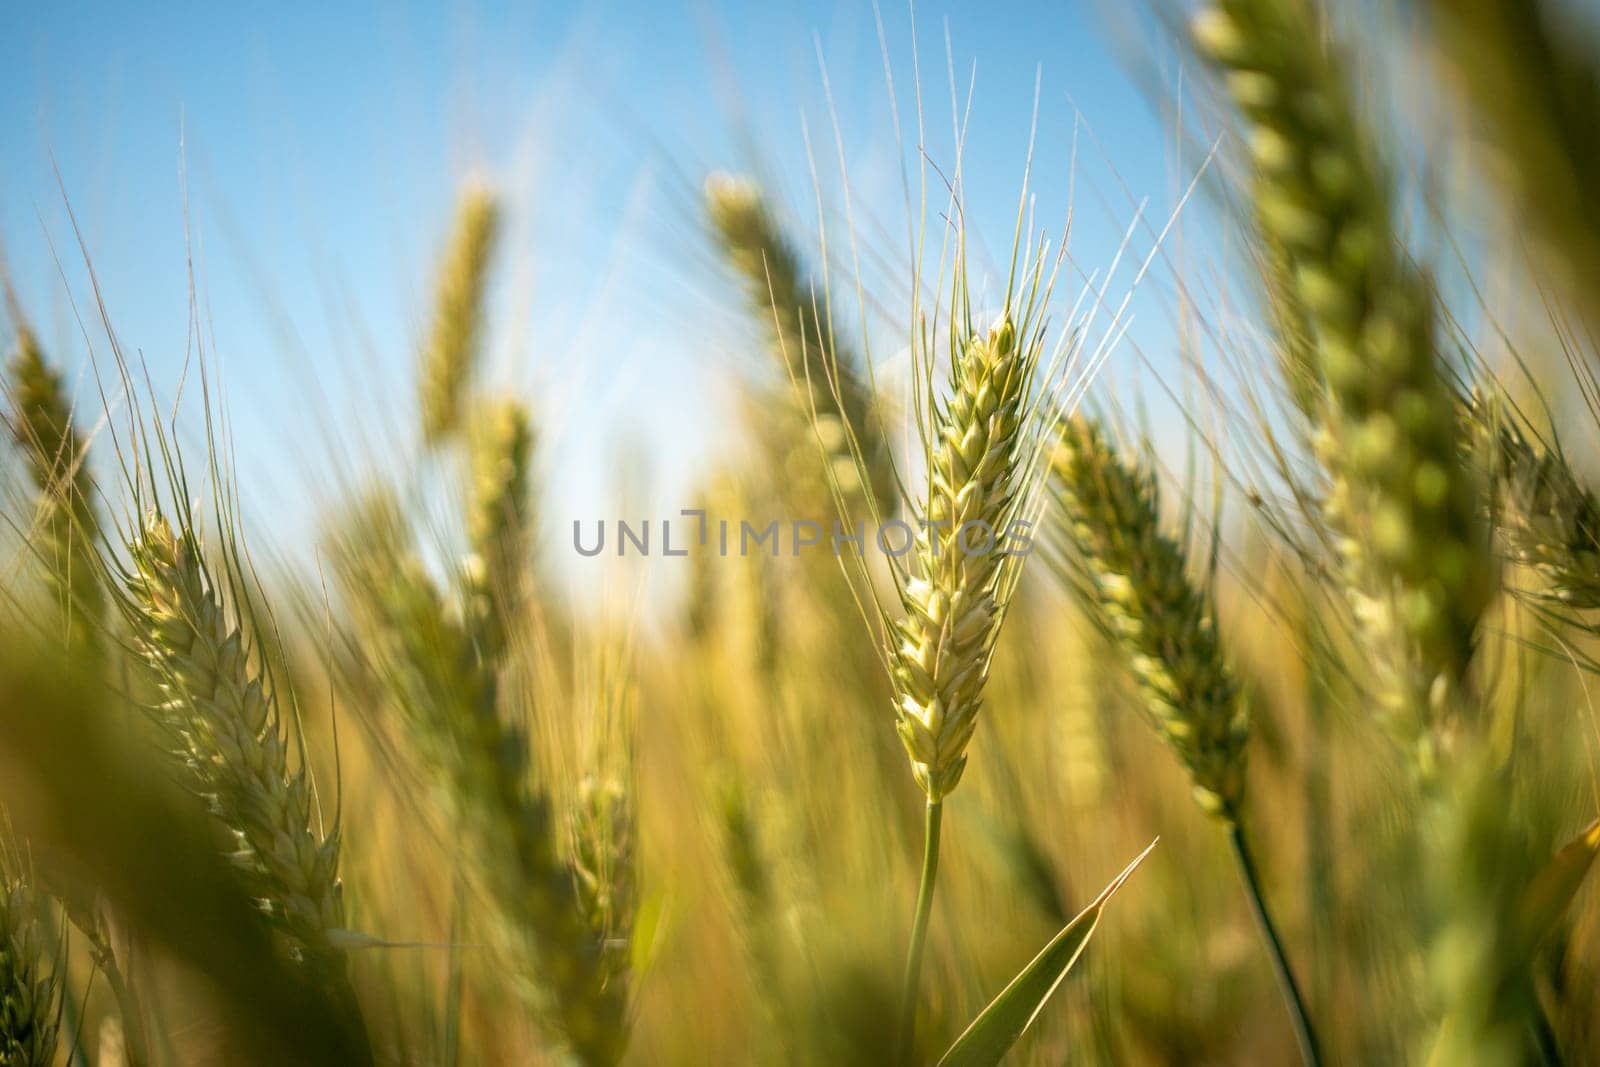 A field of wheat with a blue sky in the background. The wheat is tall and green, and the sky is clear and bright